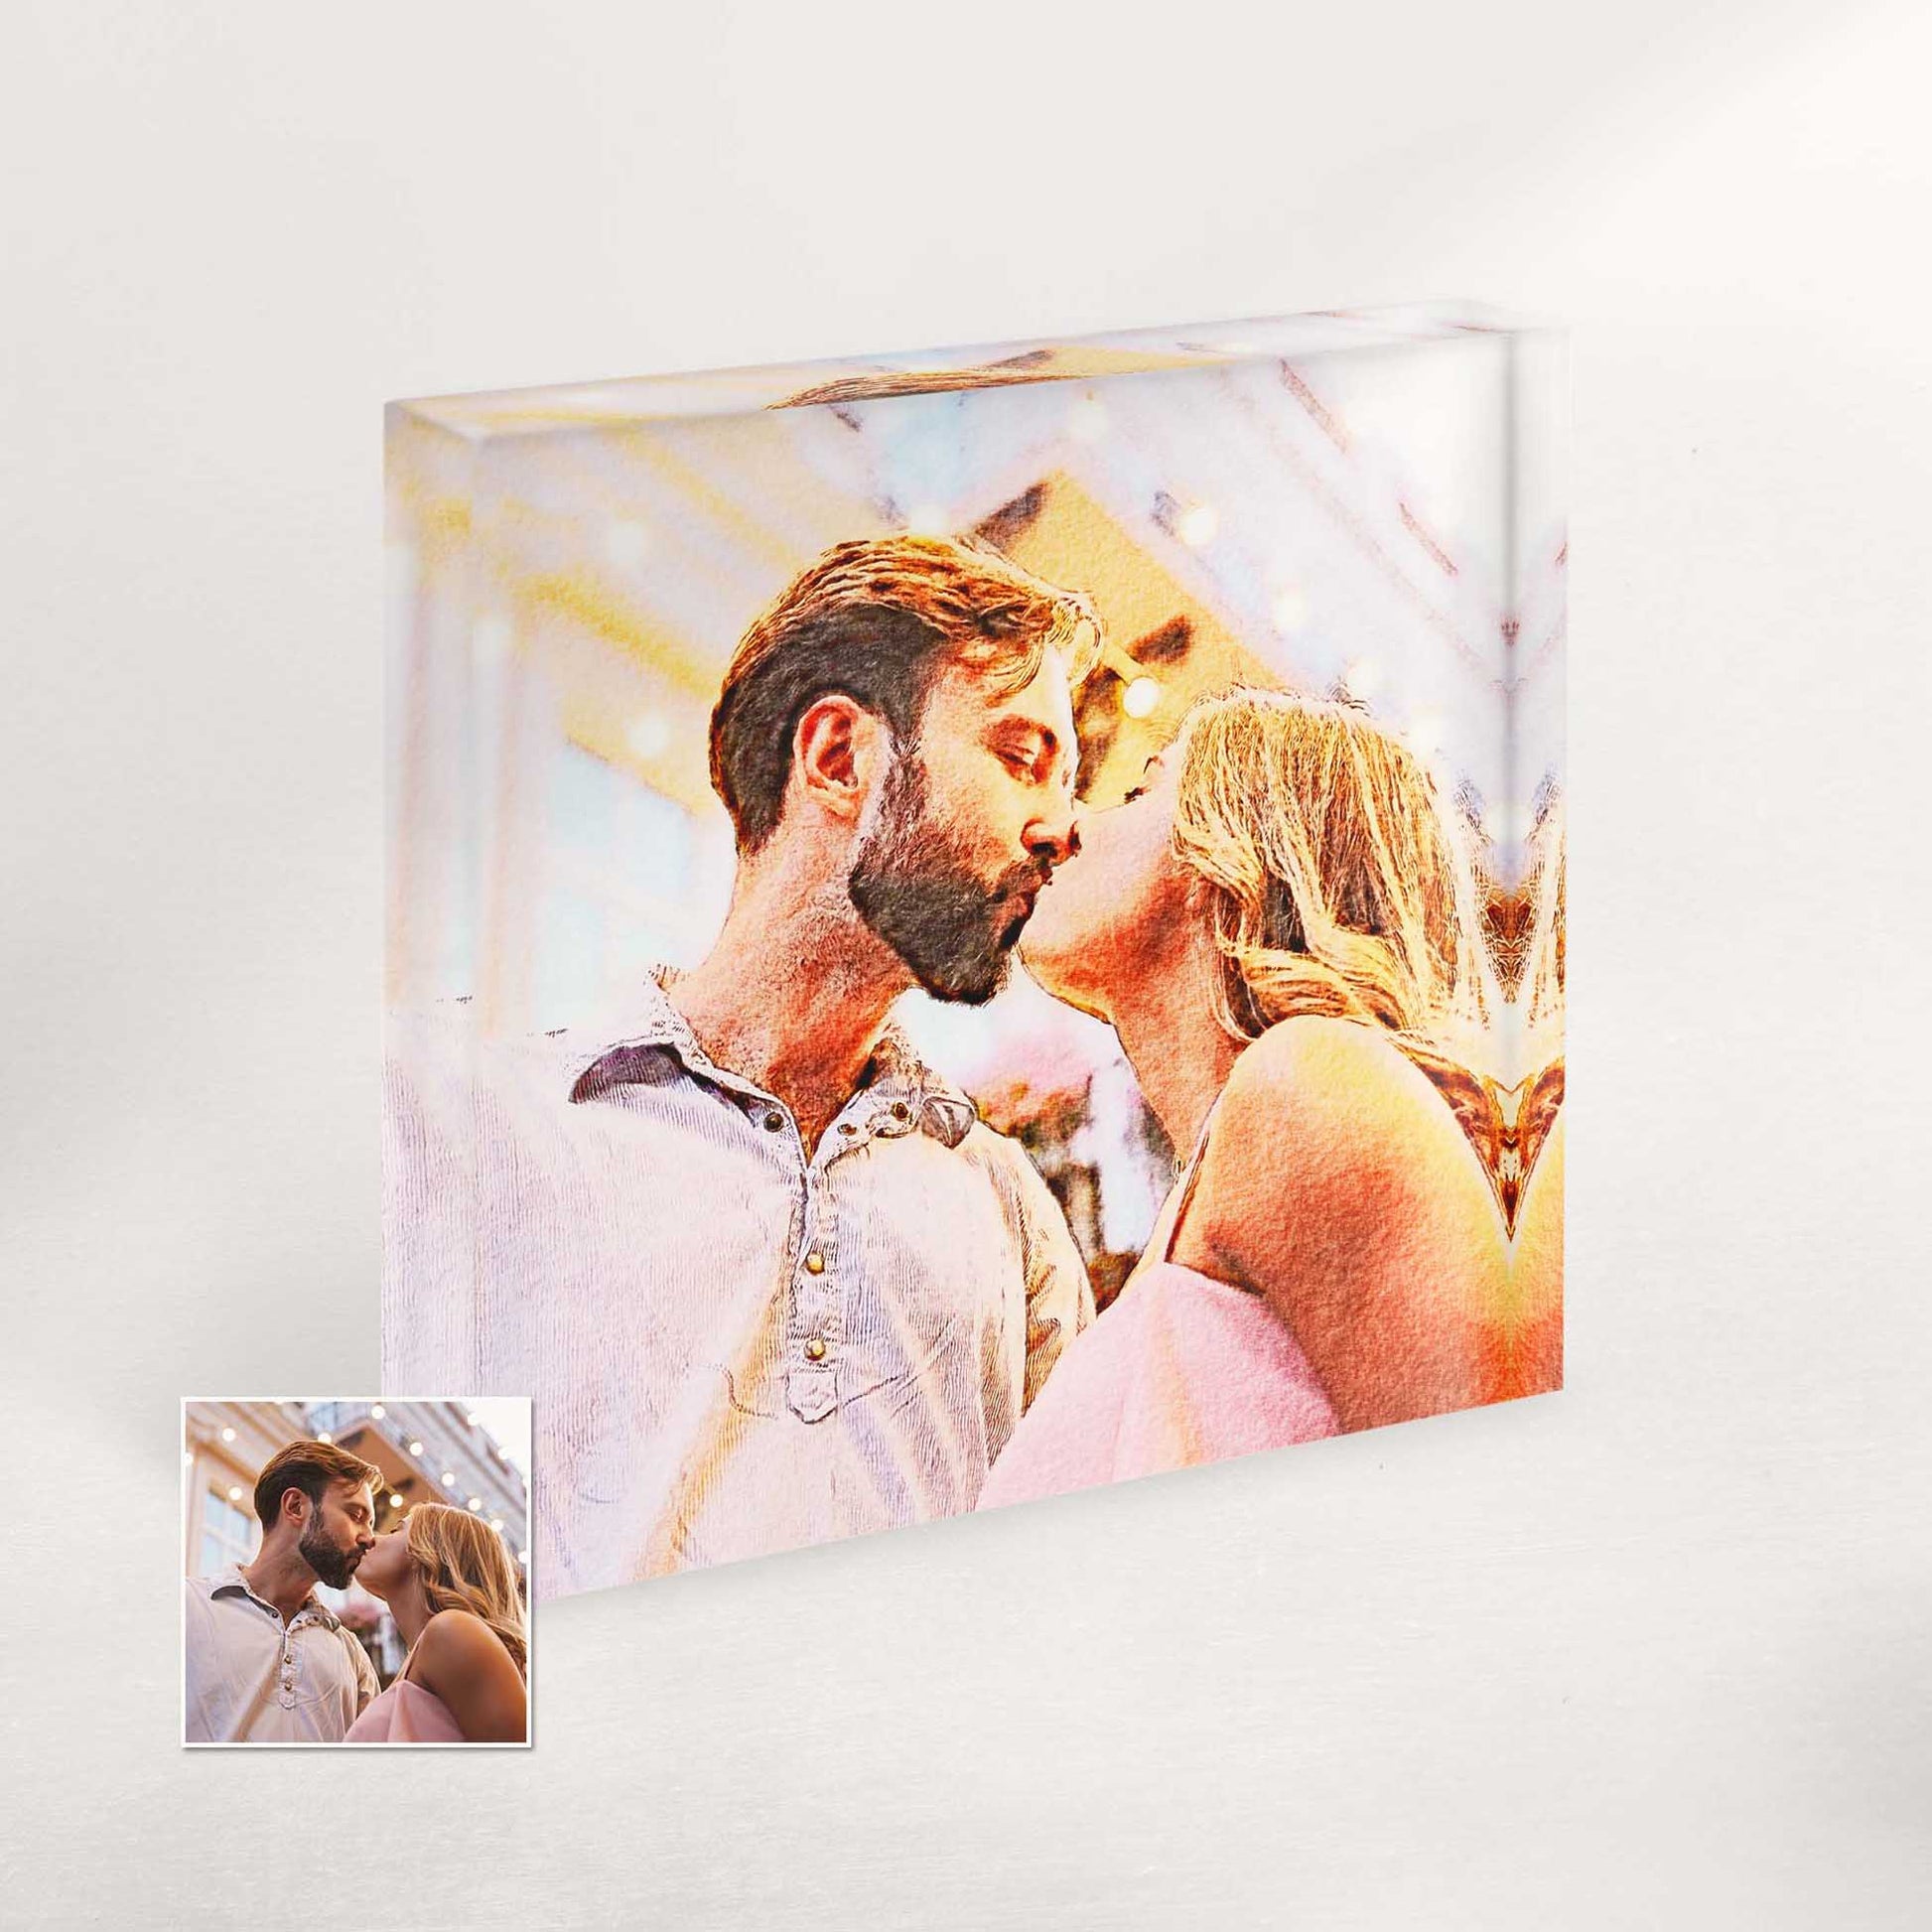 Elevate your gifting game with our Personalised Just Watercolor Effect Acrylic Block Photo. We take your own photo and transform it into a unique and enchanting watercolor-style artwork